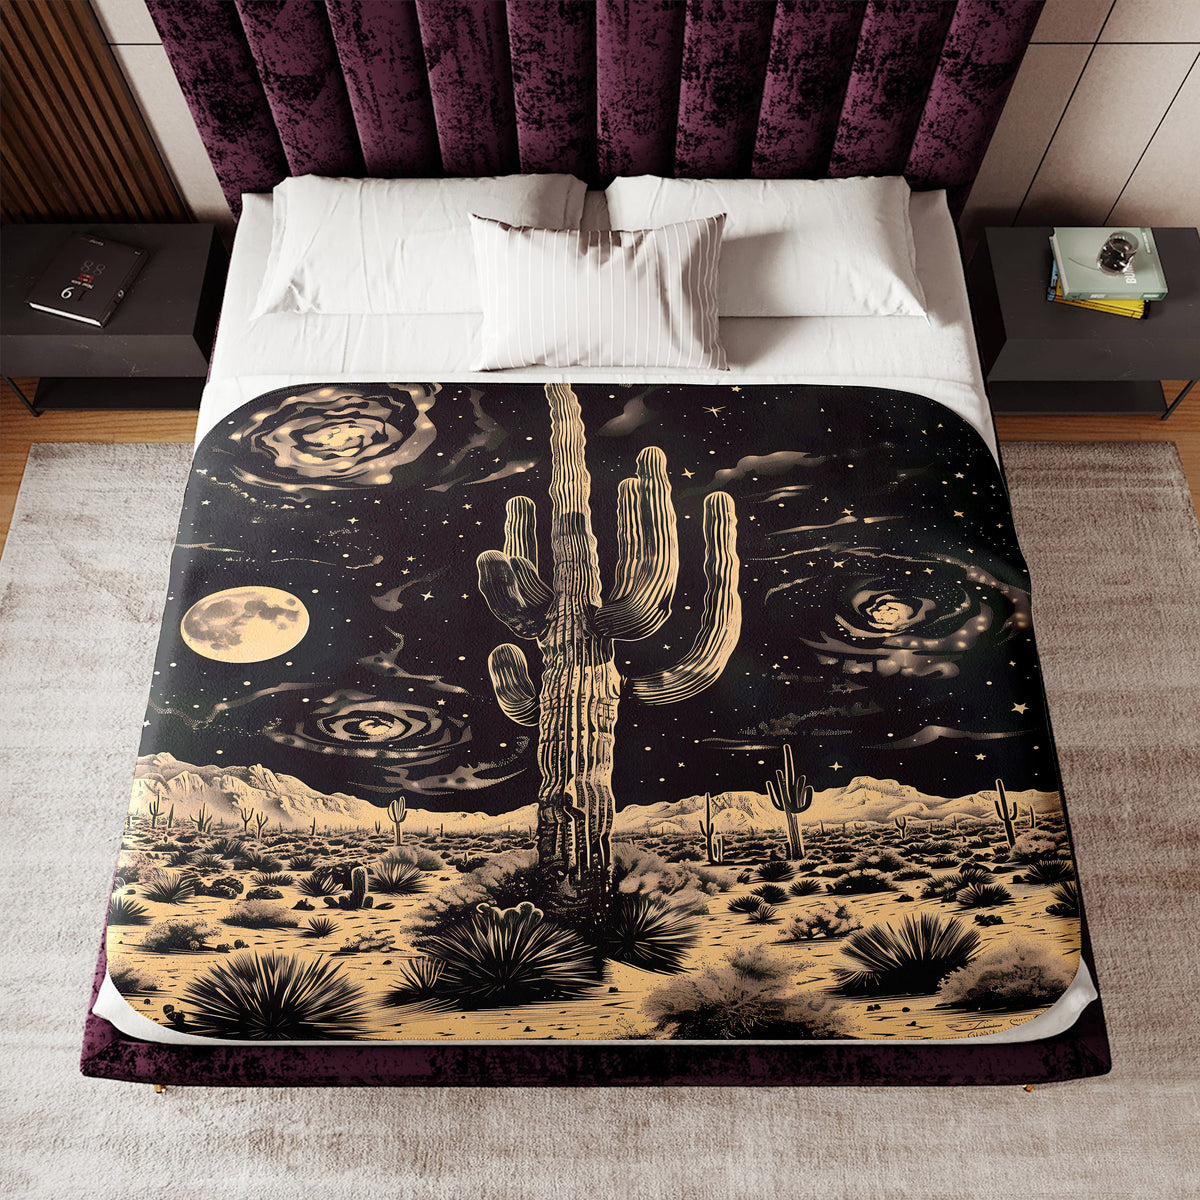 a bed covered in a blanket with a picture of a cactus on it